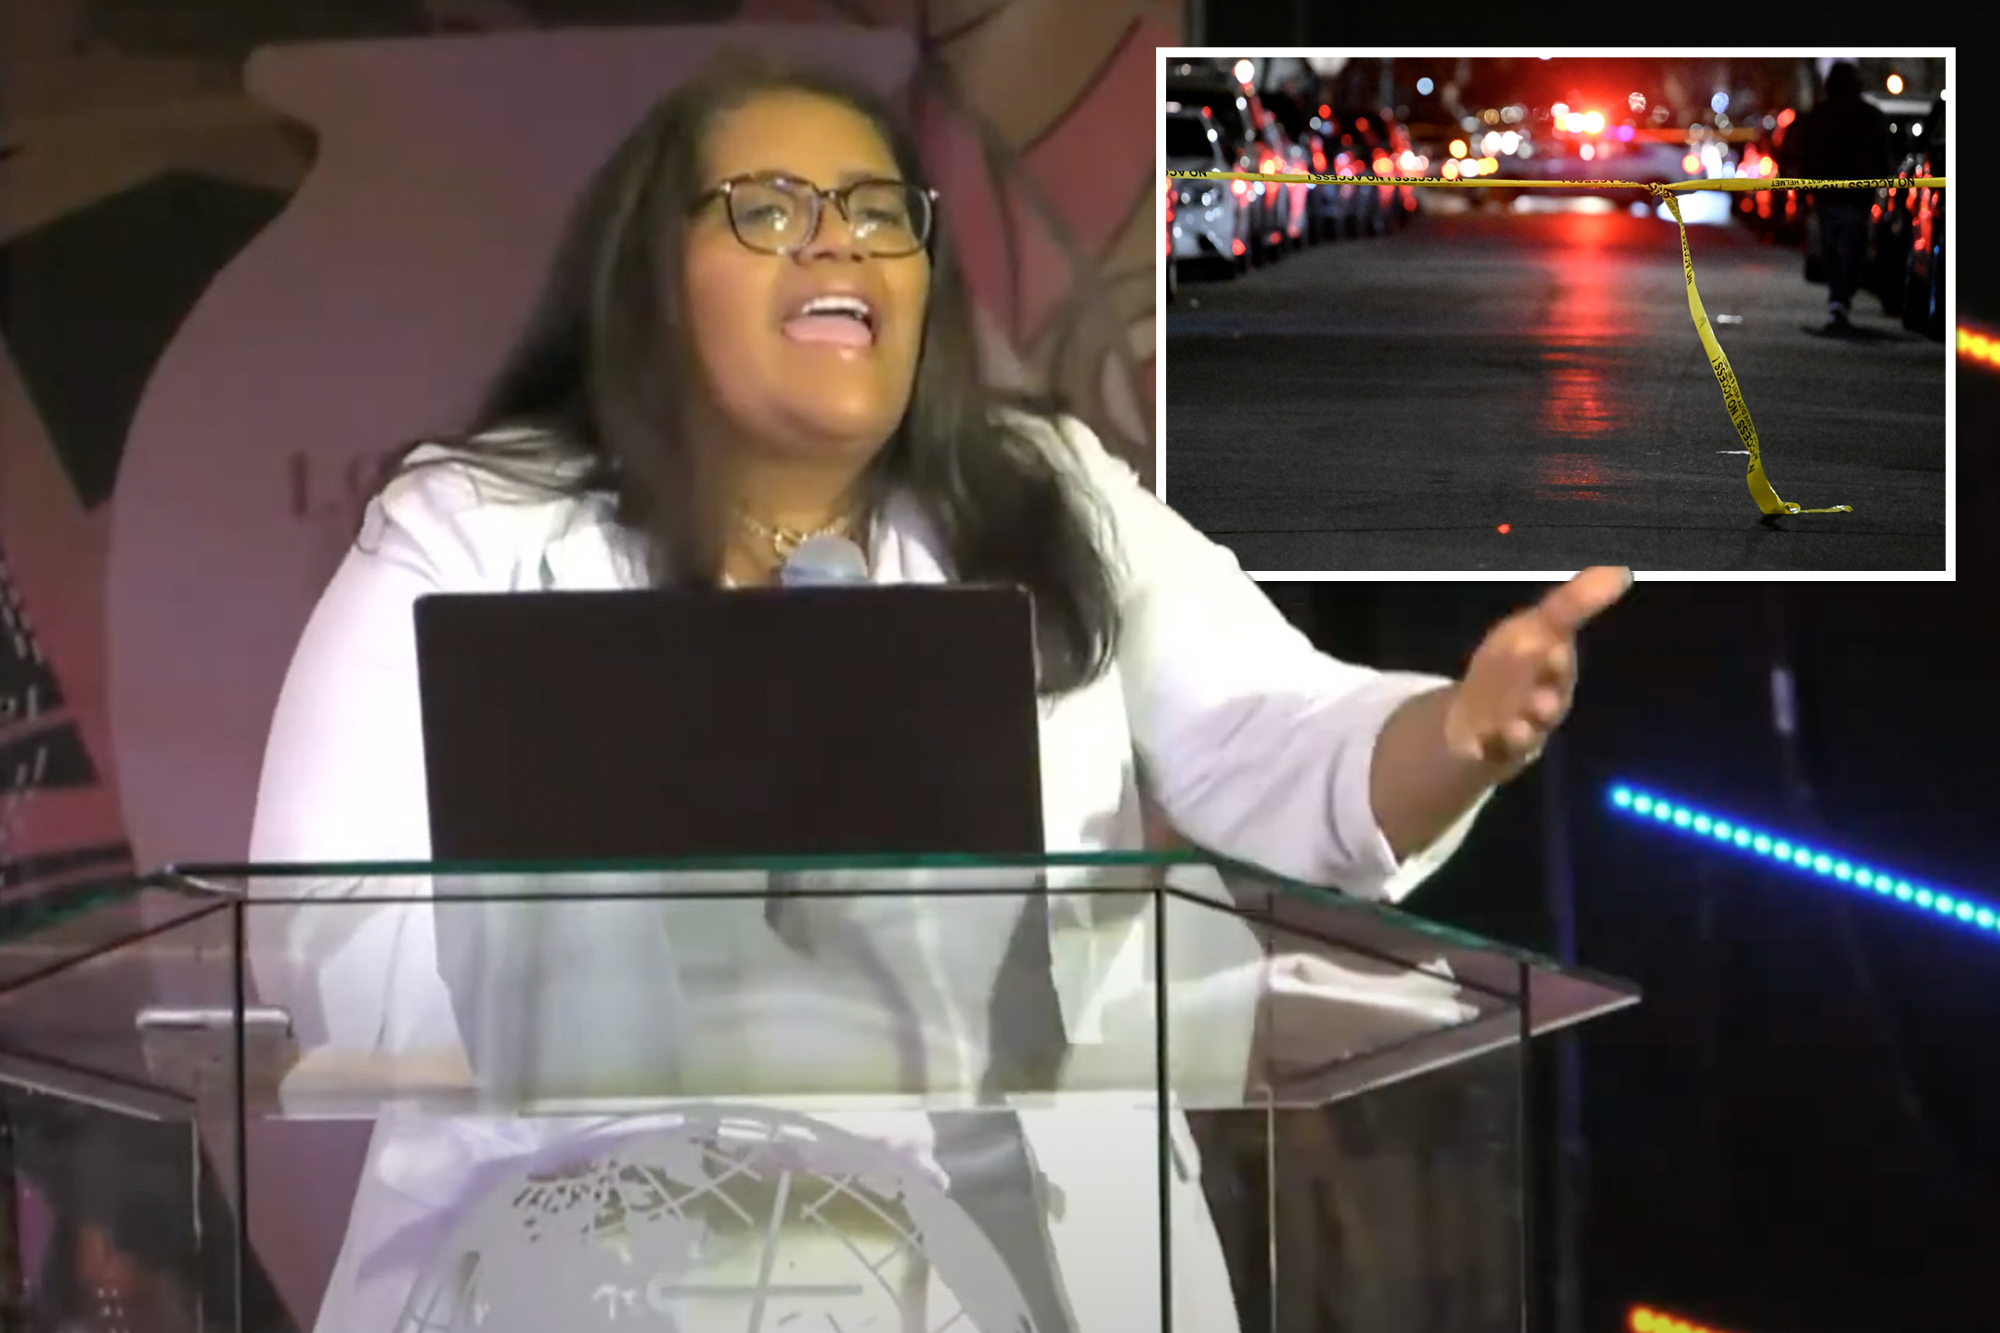 Brooklyn pastor fatally struck by car after tripping on the street